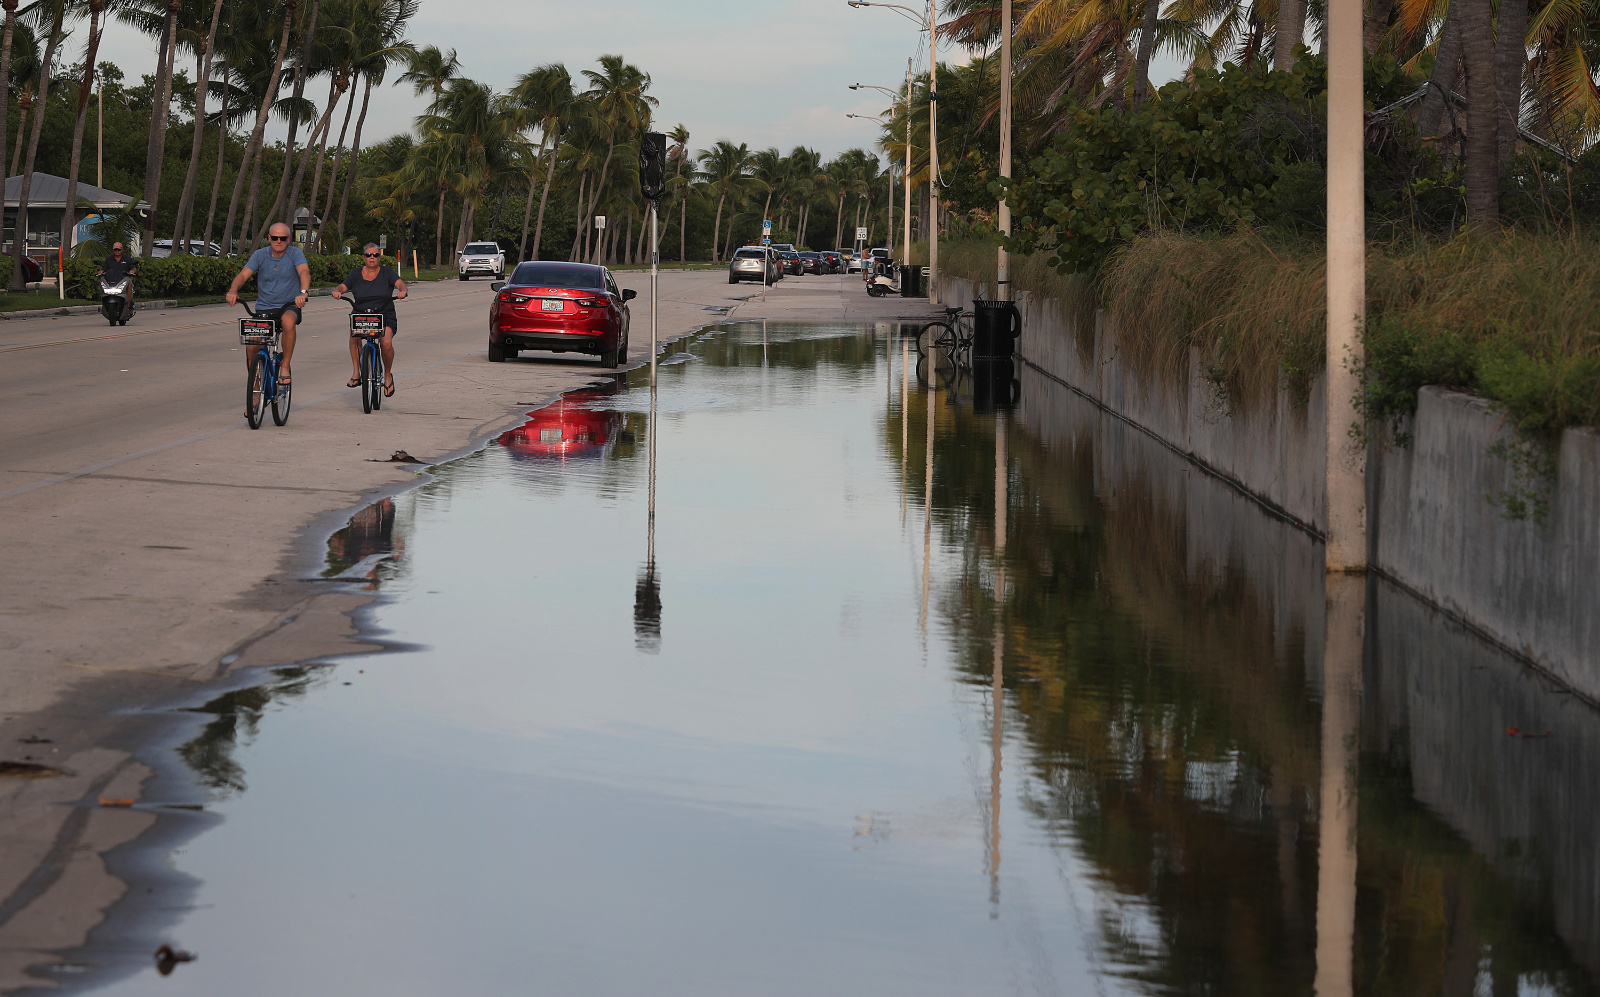 Florida is about to erase climate change from most of its laws